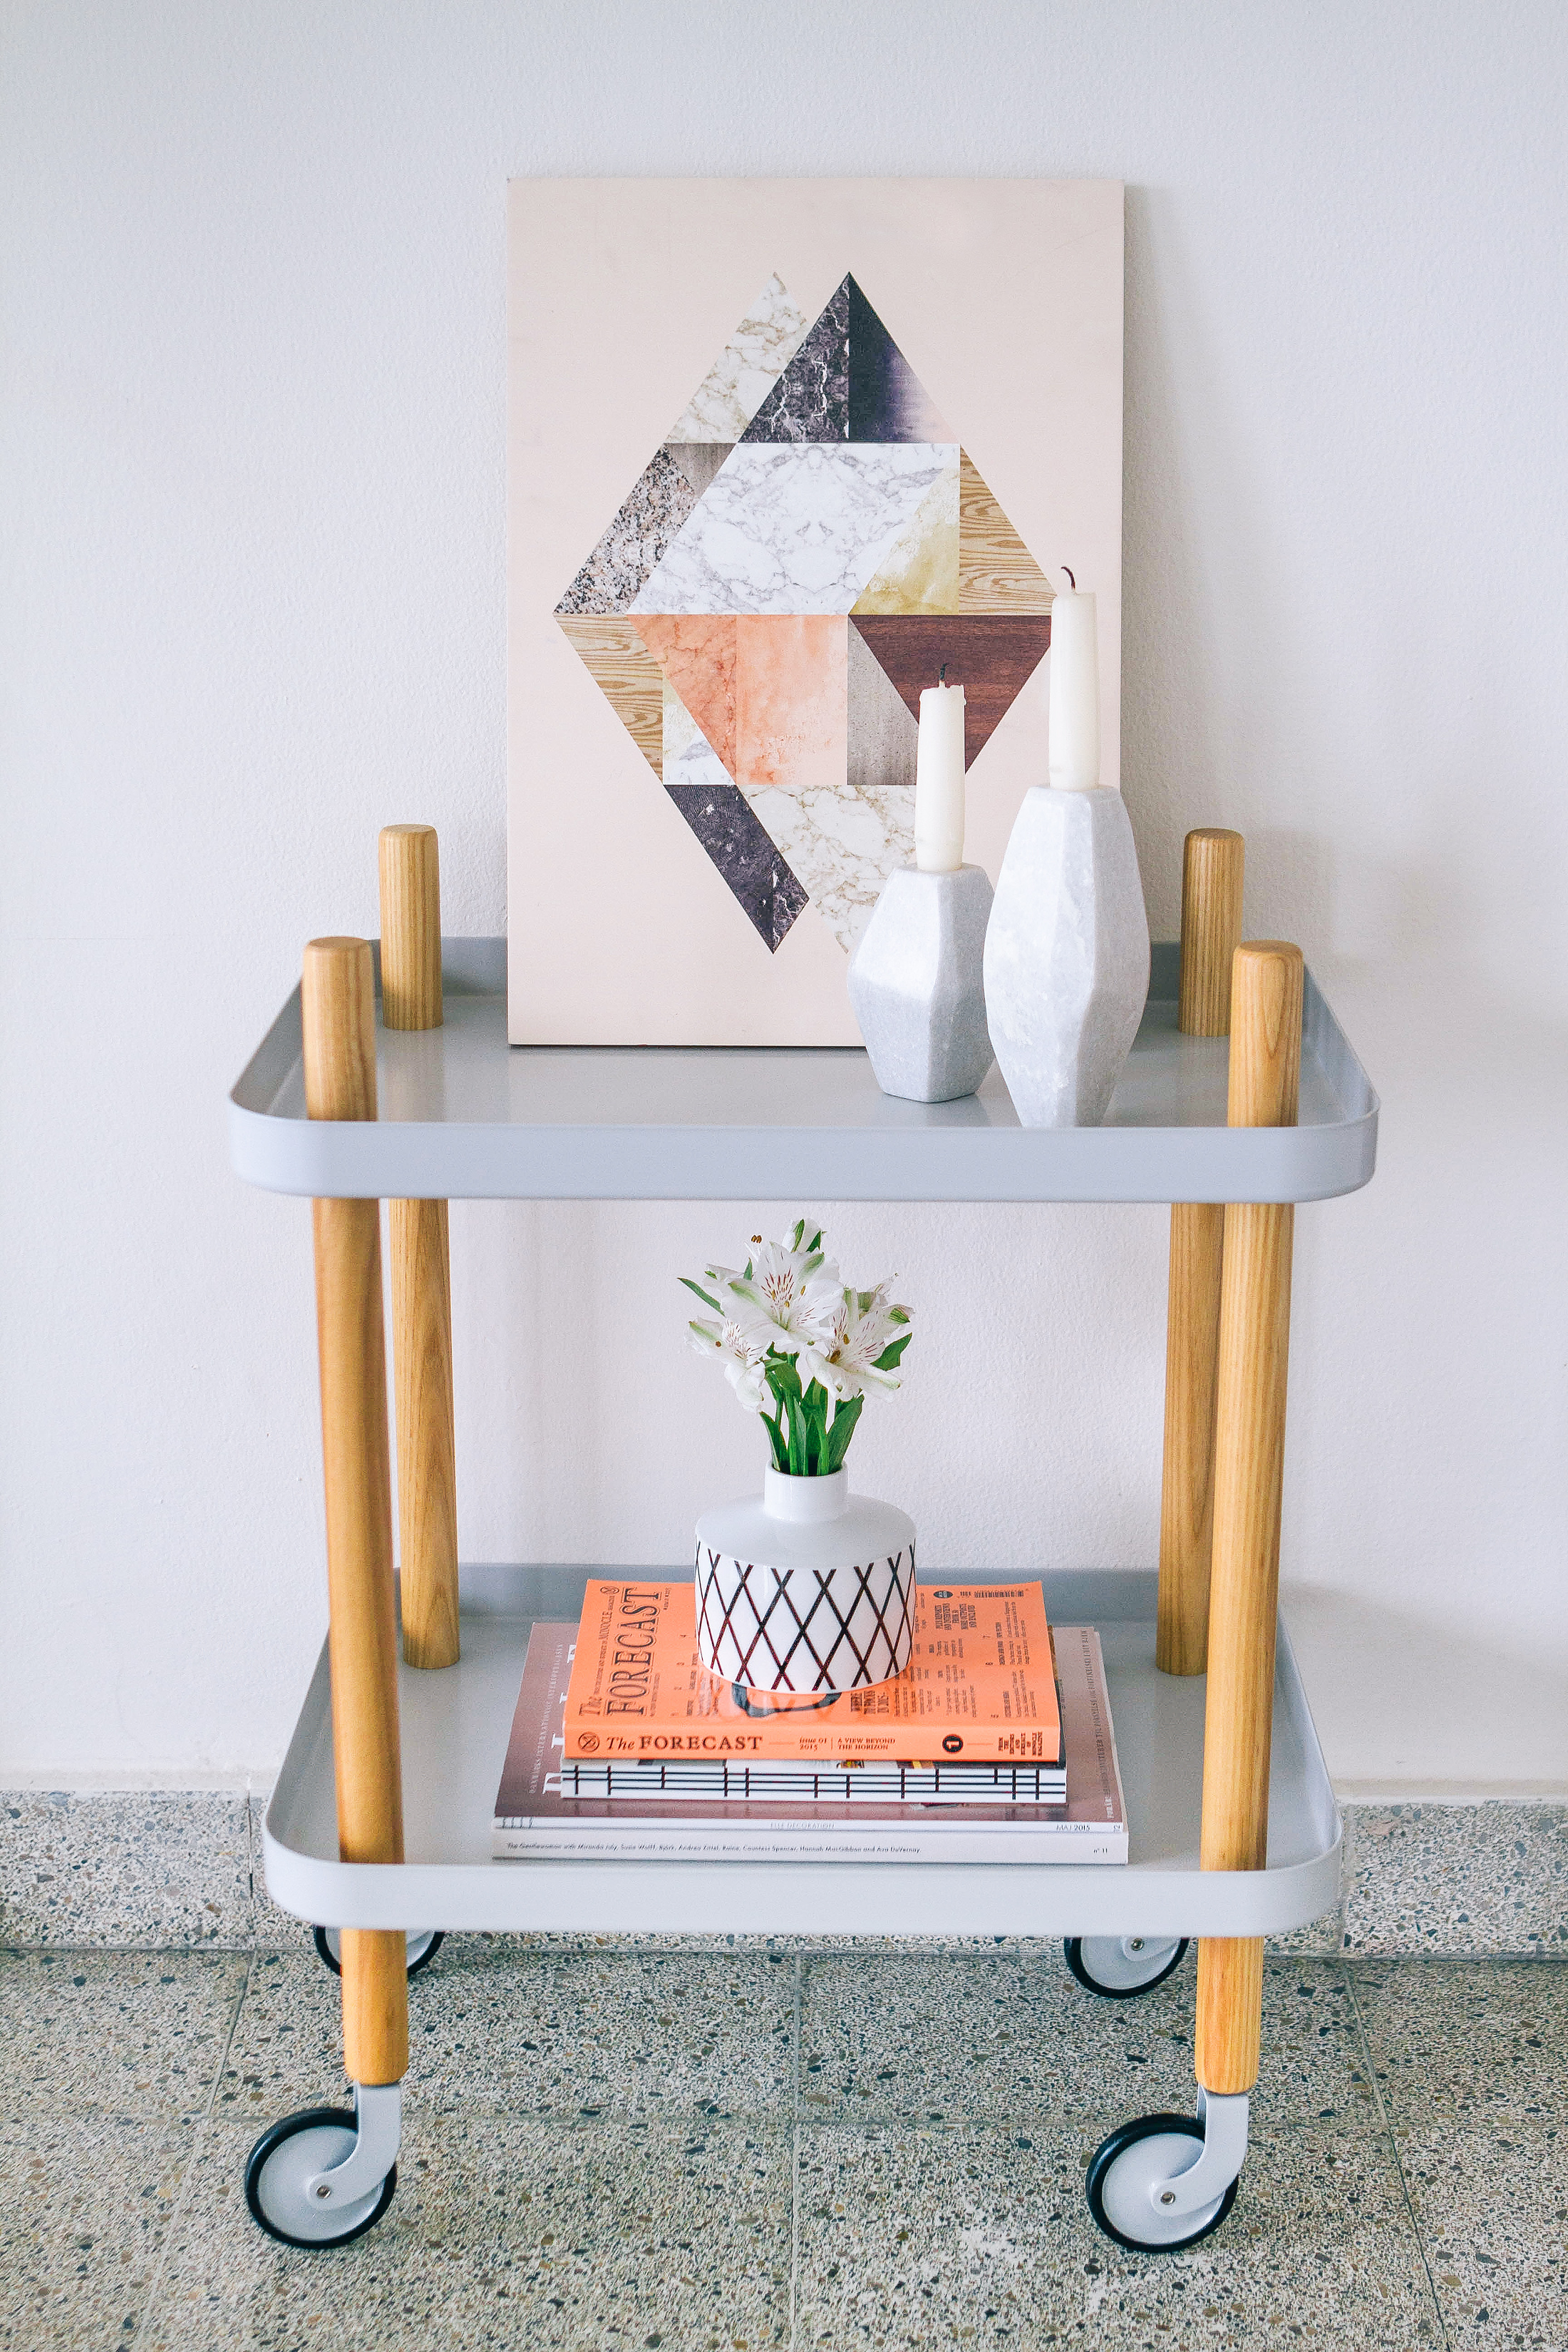 Bar cart styling with magazines, flowers and candles